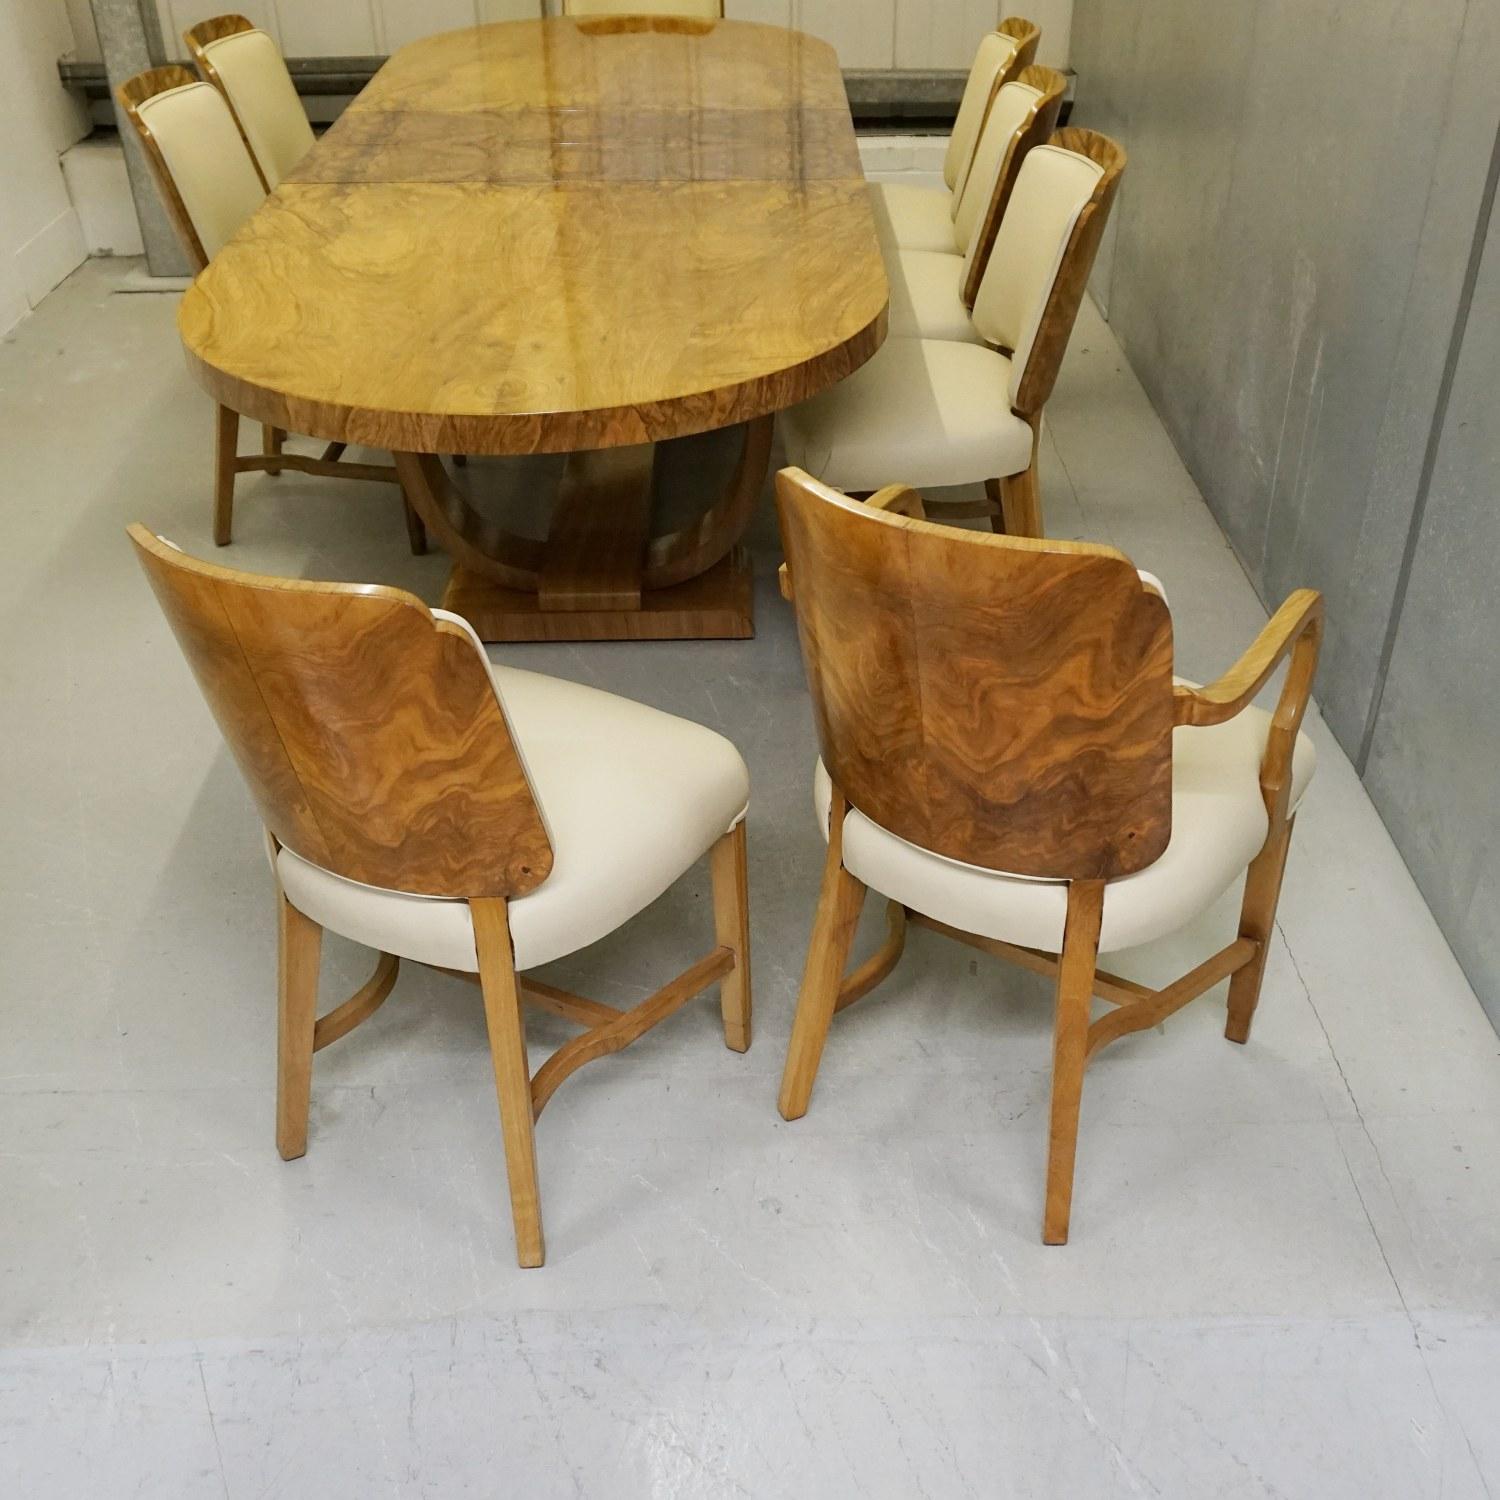 Art Deco 8-Seat Extendable Dining Suite Attributed to Heal's of London 1